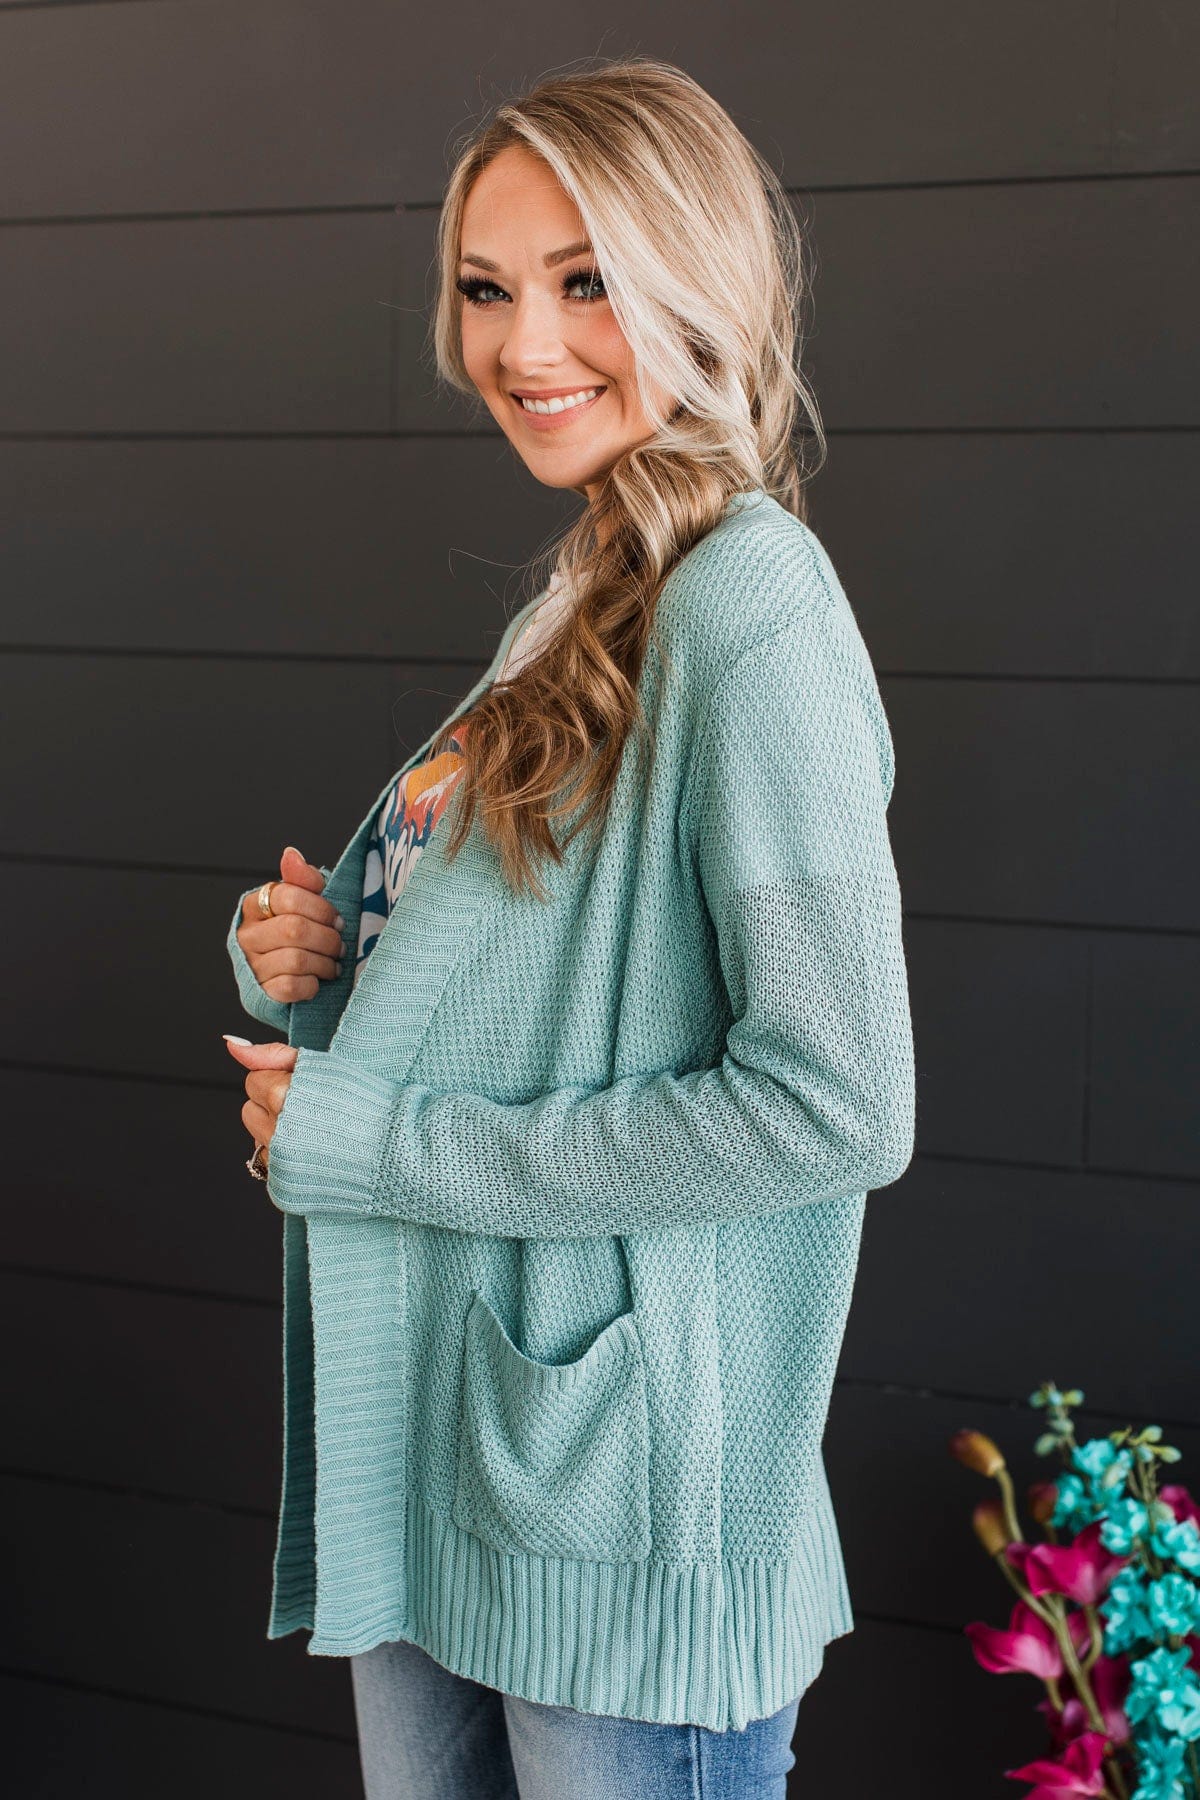 Welcoming To You Knitted Cardigan- Dusty Mint